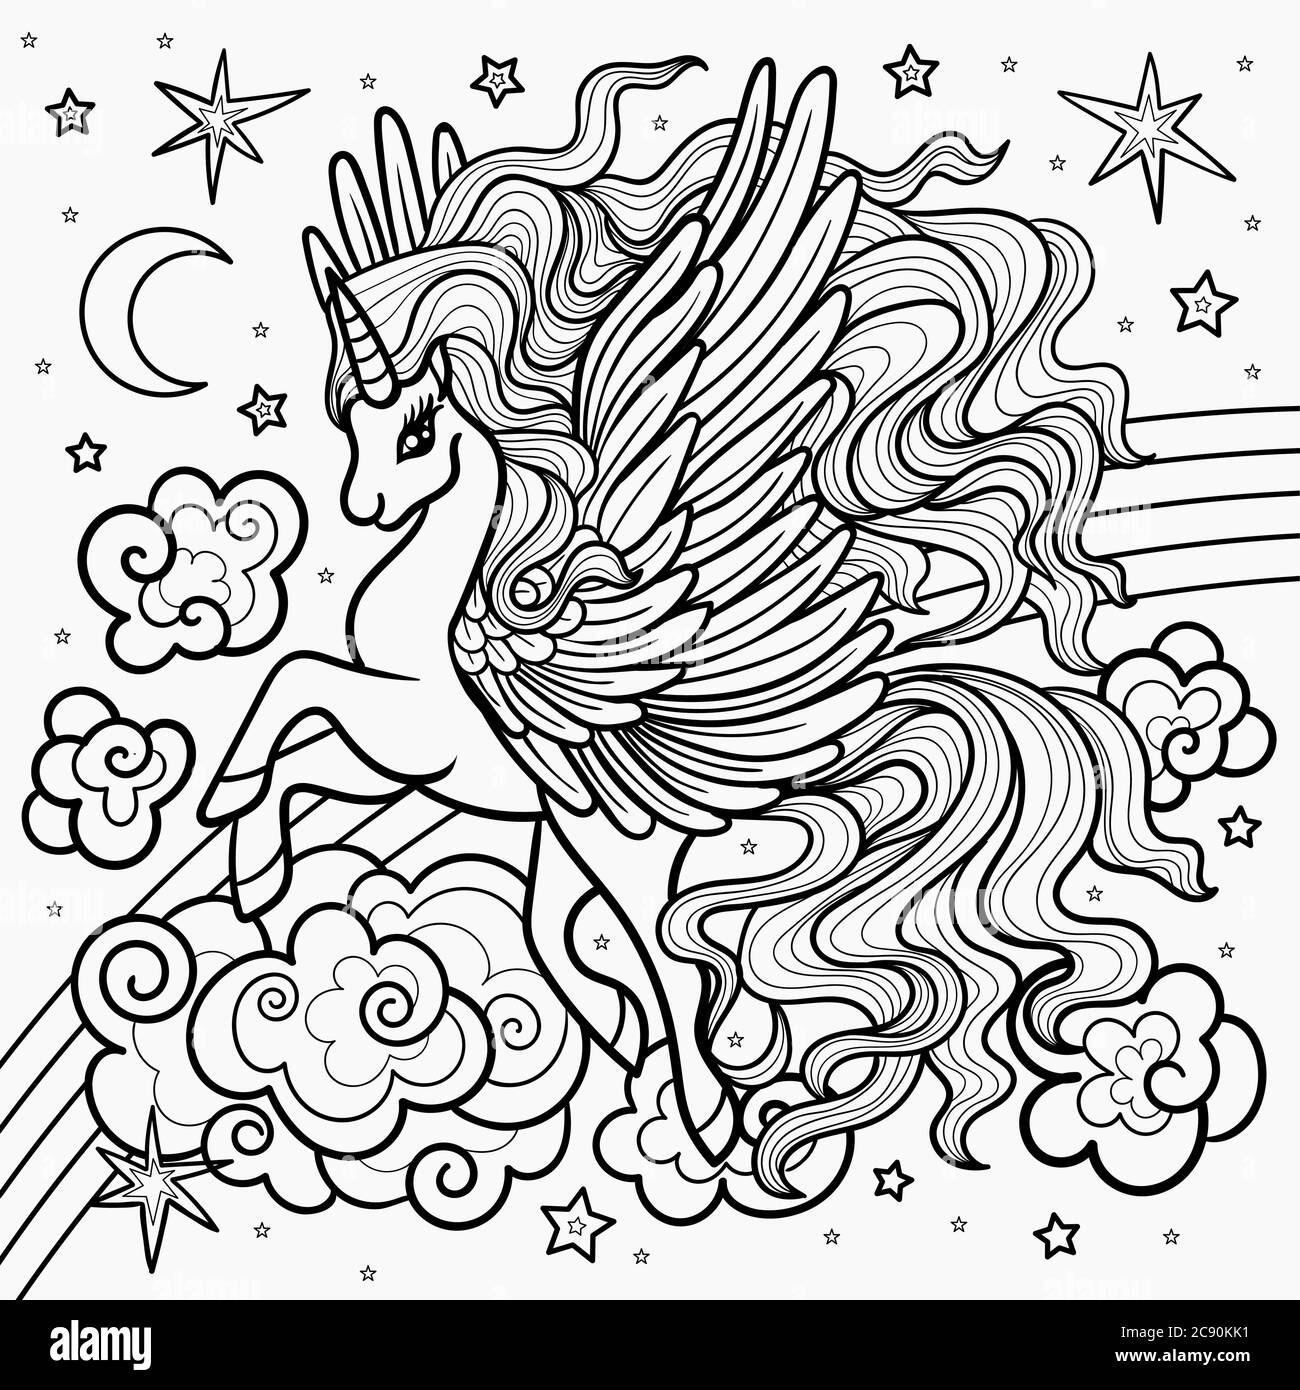 Beautiful, winged unicorn on a rainbow. Black and white illustration for coloring. For the design of prints, posters, tattoos, etc.Vector Stock Vector